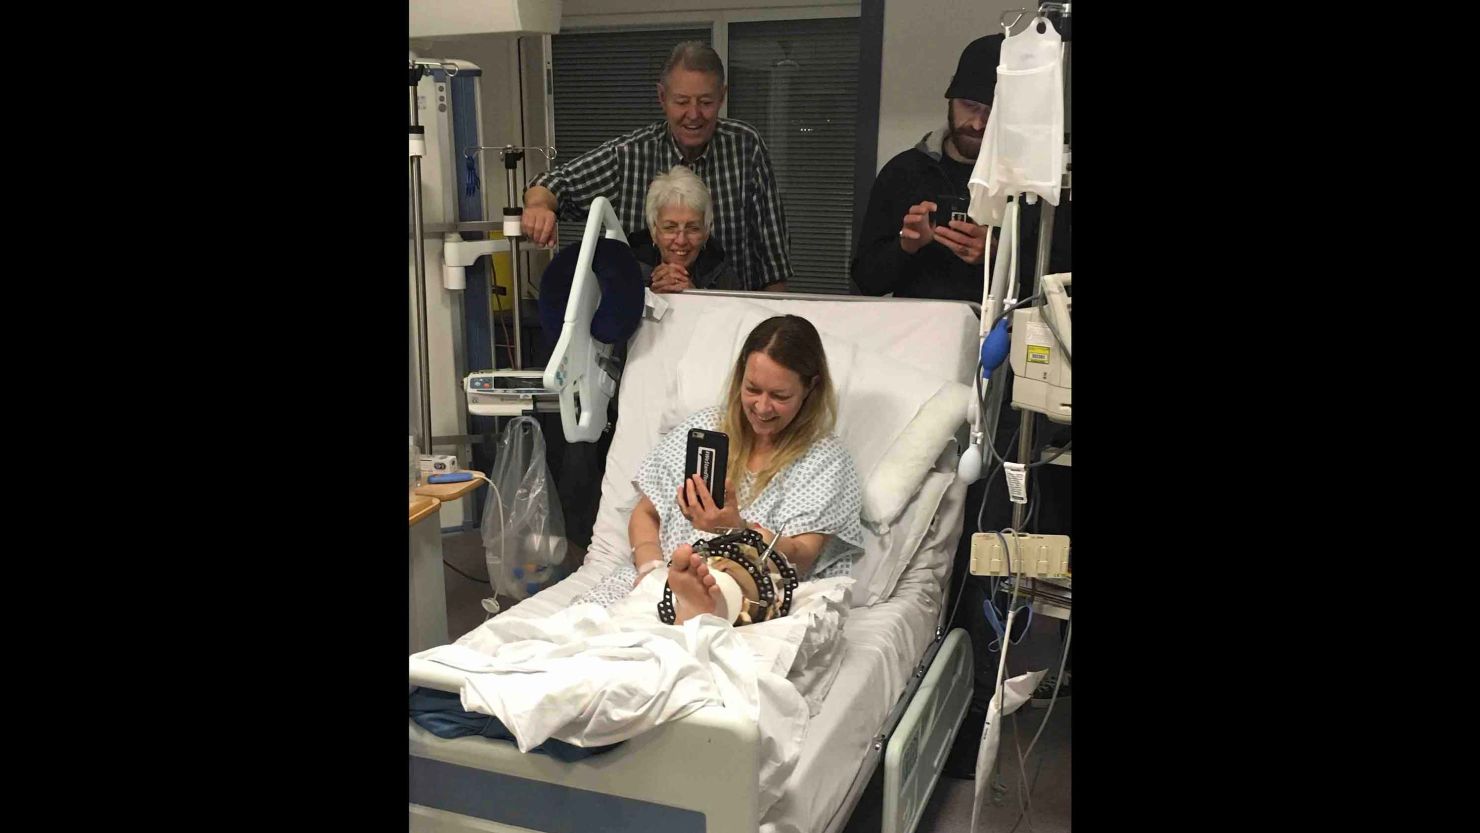 Melissa Cochran in a hospital picture posted by her brother Clint Payne to a fundraising page.